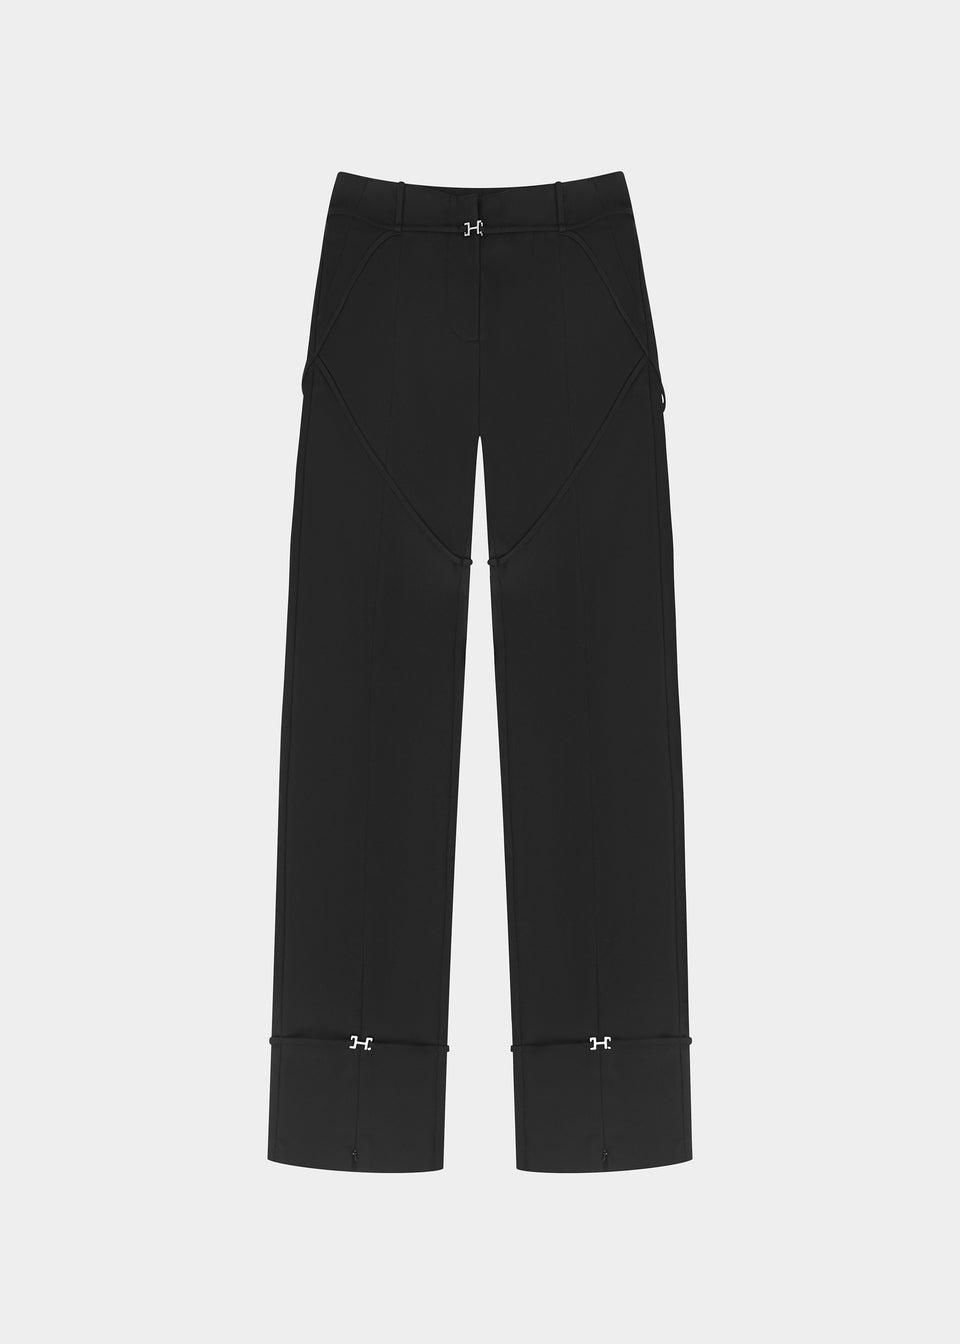 AMENTUM TAILORED PANTS by HELIOT EMIL